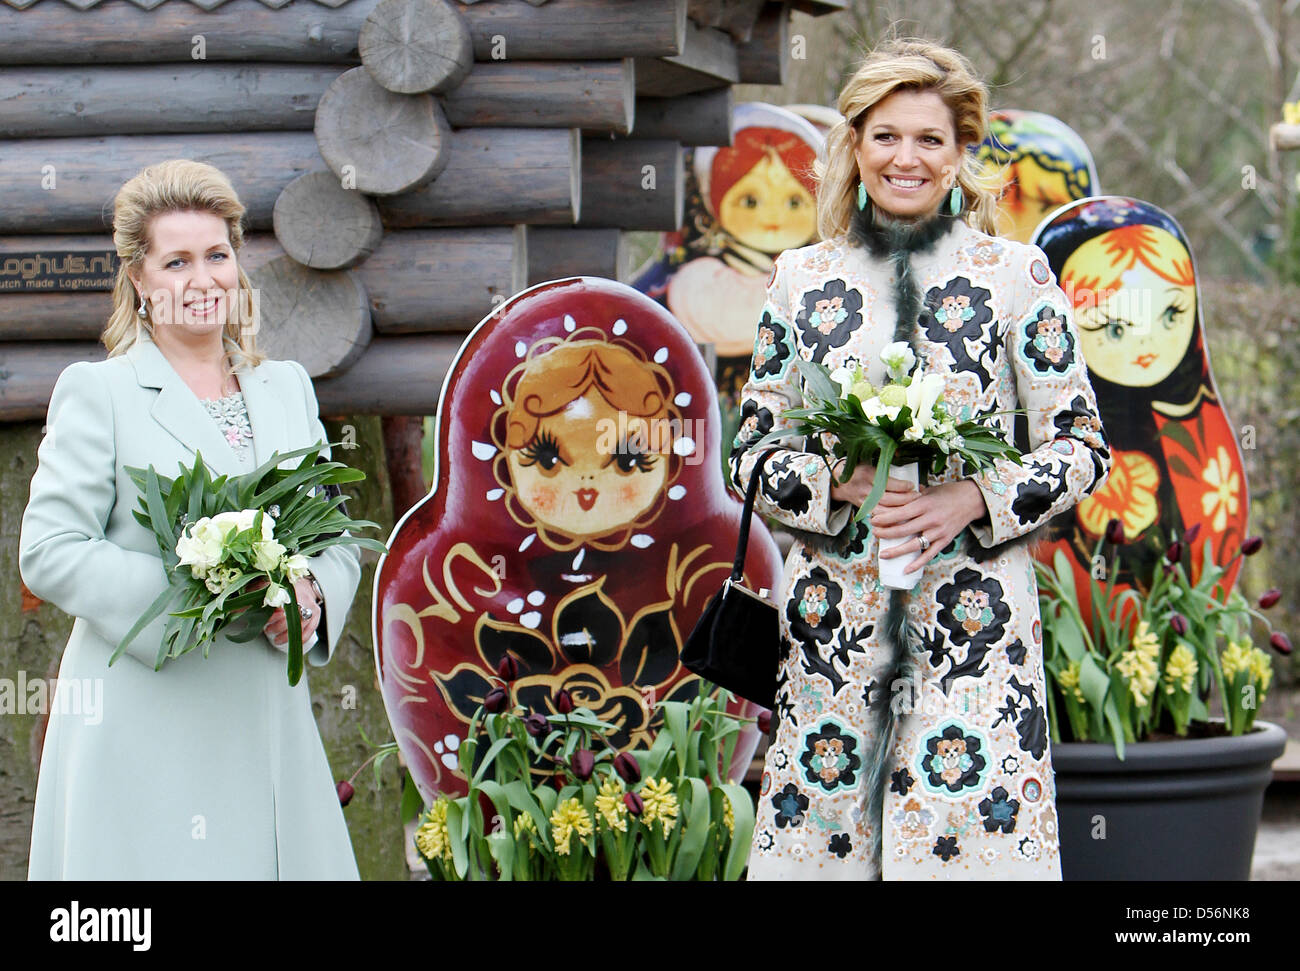 Princess Maxima of the Netherlands (R) and Russian First Lady Svetlana Medvedeva attend the season opening of the International flower exhibition 'De Keukenhof' in Lisse, Netherlands, 17 March 2010. The theme of this year's exhibition is 'From Russia with Love'. Photo: Patrick van Katwijk Stock Photo